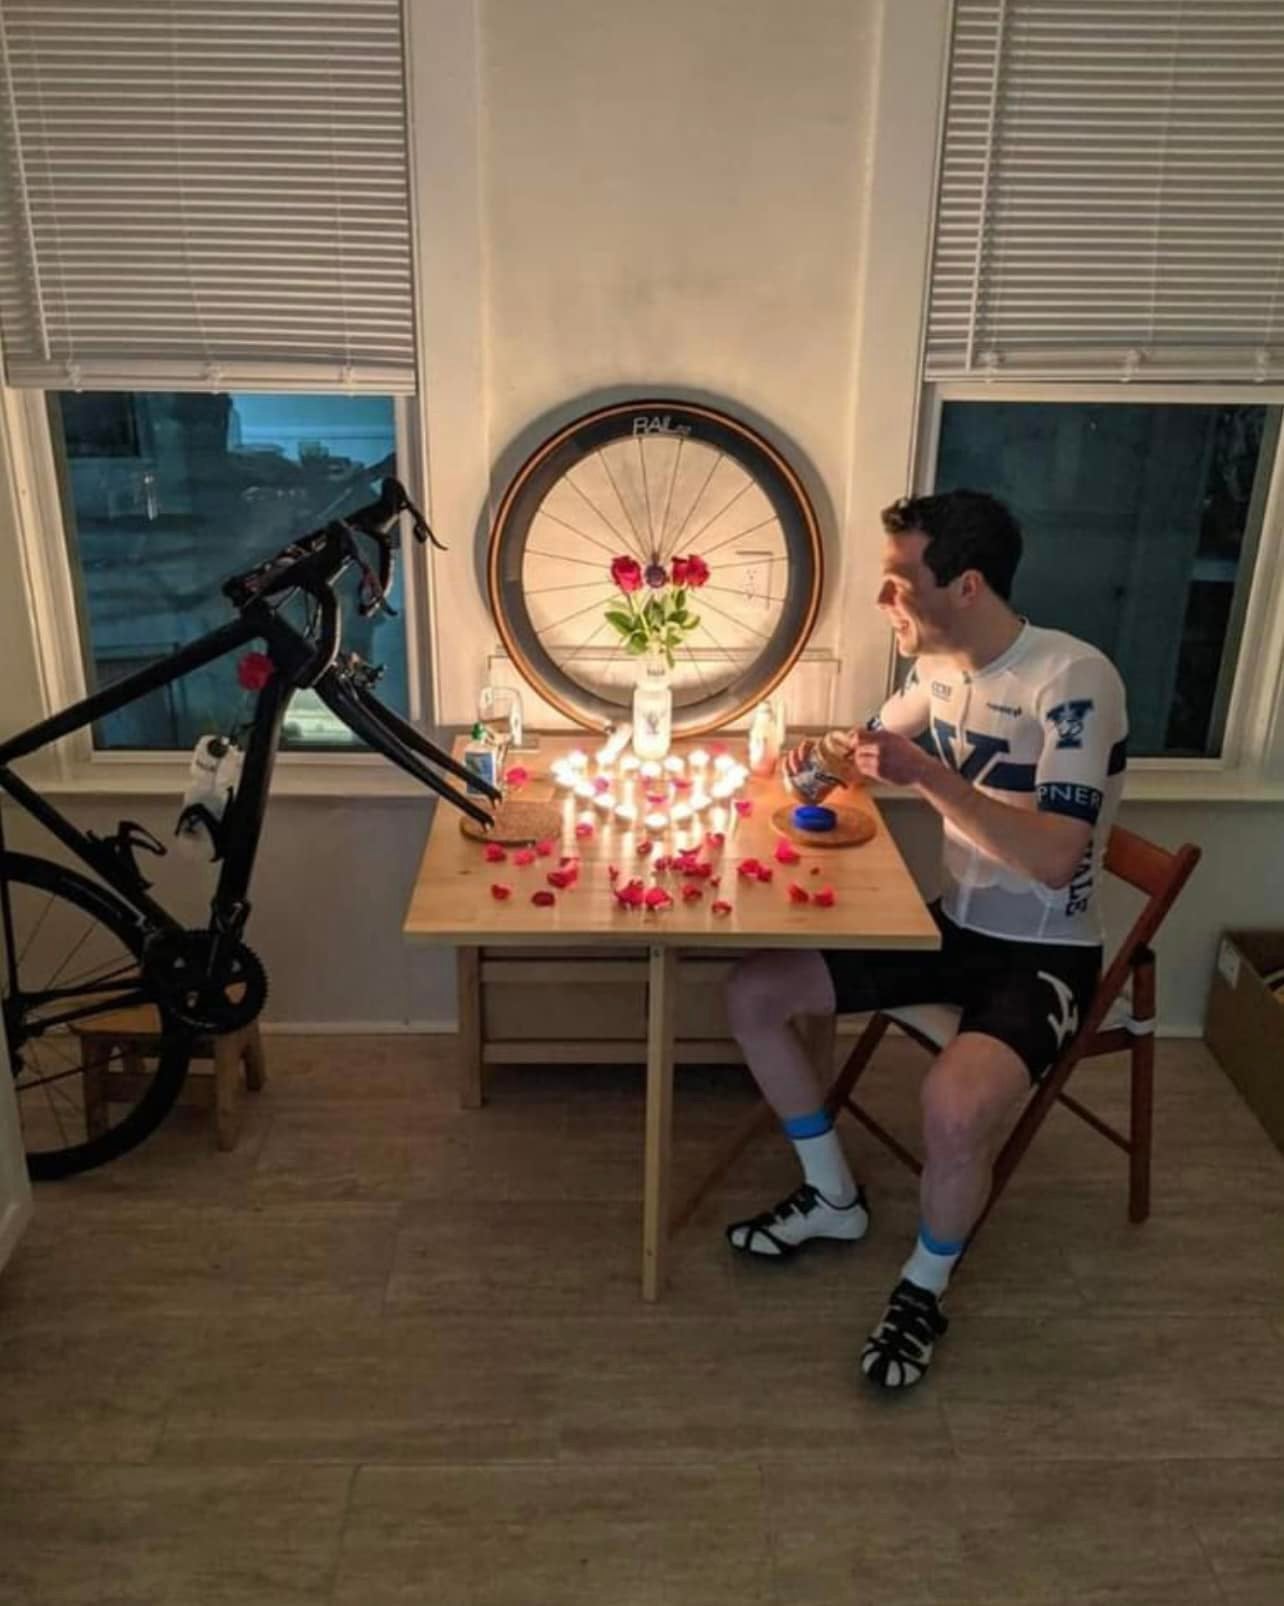 Valentine's Day cycling